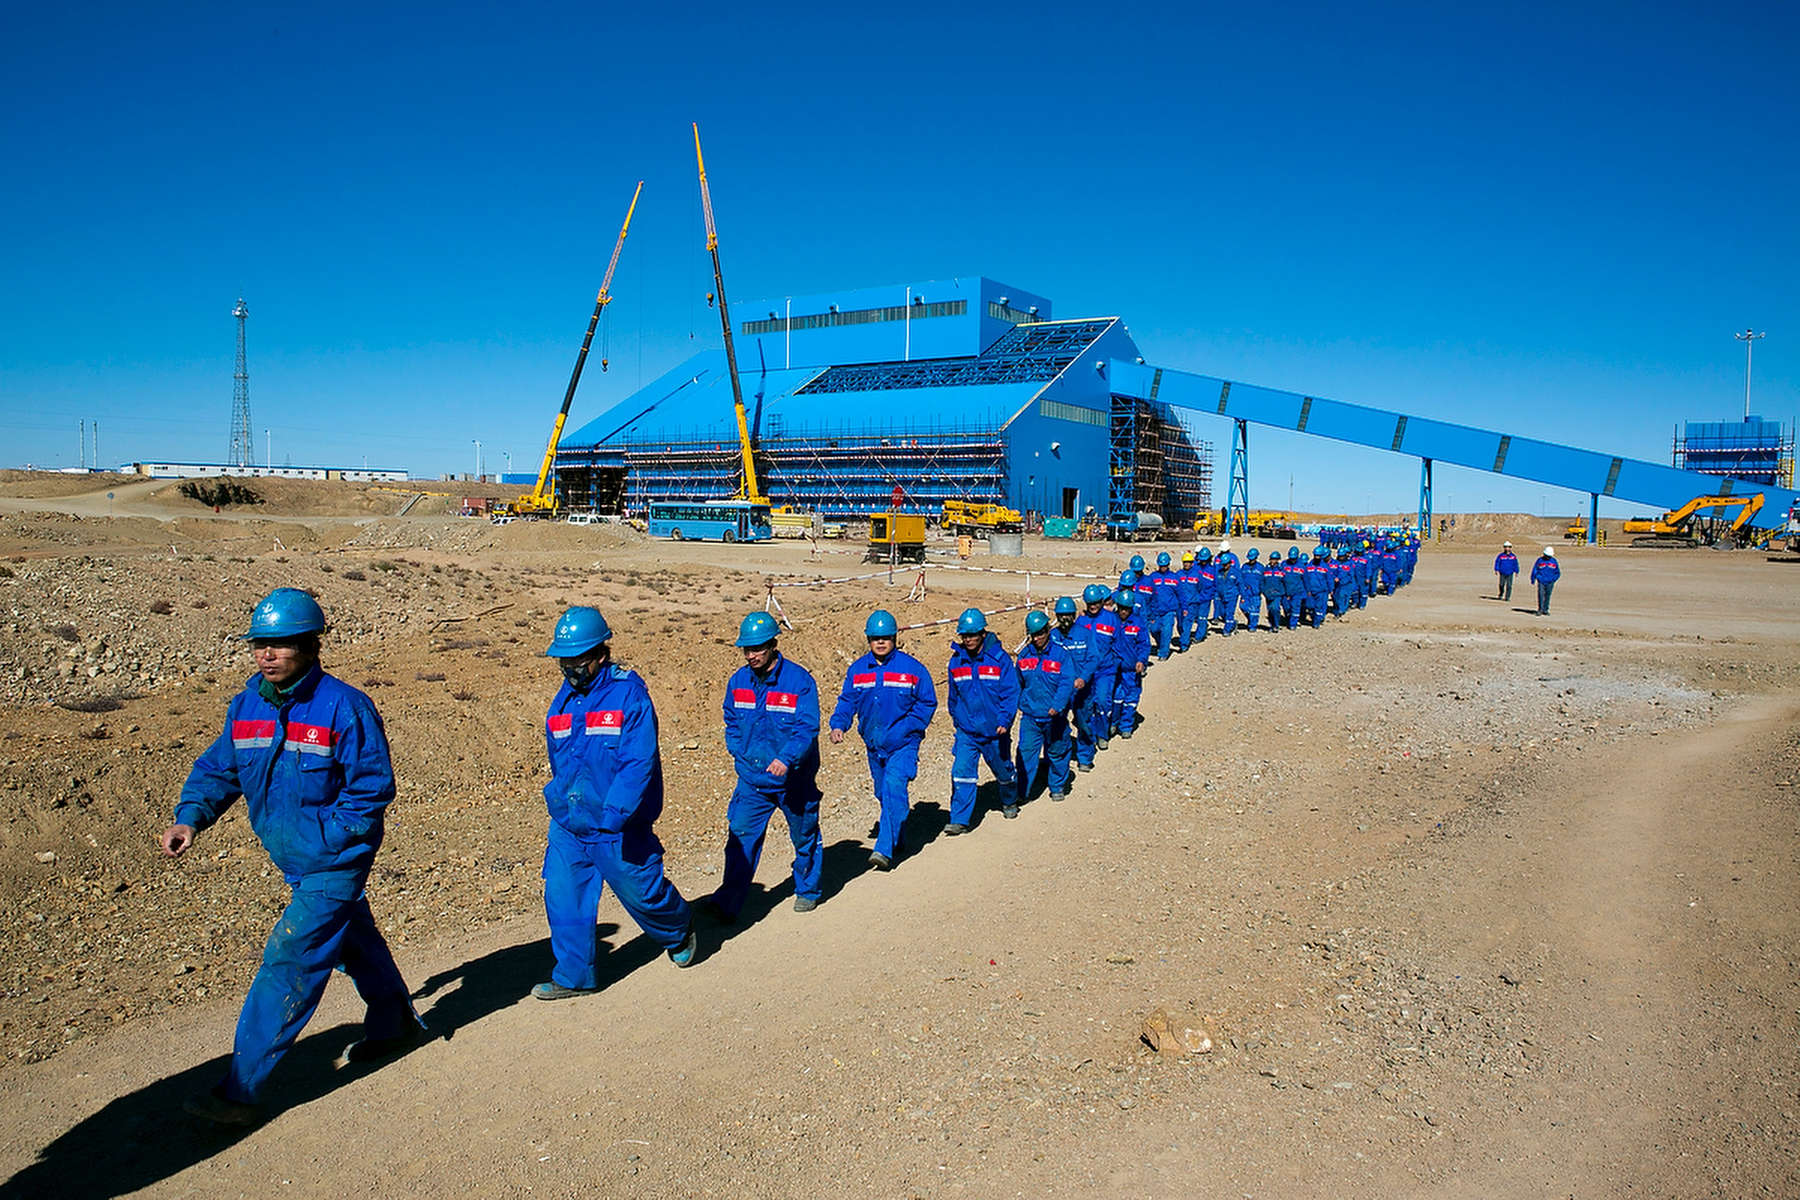 KHANBOGD-SOUTH GOBI DESERT, MONGOLIA - OCTOBER 11:  Chinese construction workers  march together as they leave on a lunch break at the Oyu Tolgoi mine October 11, 2012 located in the south Gobi desert, Khanbogd region, Mongolia. About 2,500  Chinese workers are contracted to help with construction onsite. The Oyu Tolgoi copper and gold mine (translated means Turquiose Hill) is a combined open pit and underground mining project.  While the construction continues open pit mining is currently underway with full production expected later in 2012. When the mine starts full operation the country will be set to become one of the world's top copper and gold producers with estimates of 450,000 tons of copper and 330,000 ounces of gold. Financing for the project has come in part from the Rio Tinto Group and an investment agreement between Ivanhoe Mines and the government of Mongolia. Mongolia’s largest foreign investment project to date is projected to increase the country’s GDP by 35%. Many estimate Mongolia to be the world's fastest growing economy with an estimated $1.3 trillion in untapped mineral resources. (Photo by Paula Bronstein/Getty Images)